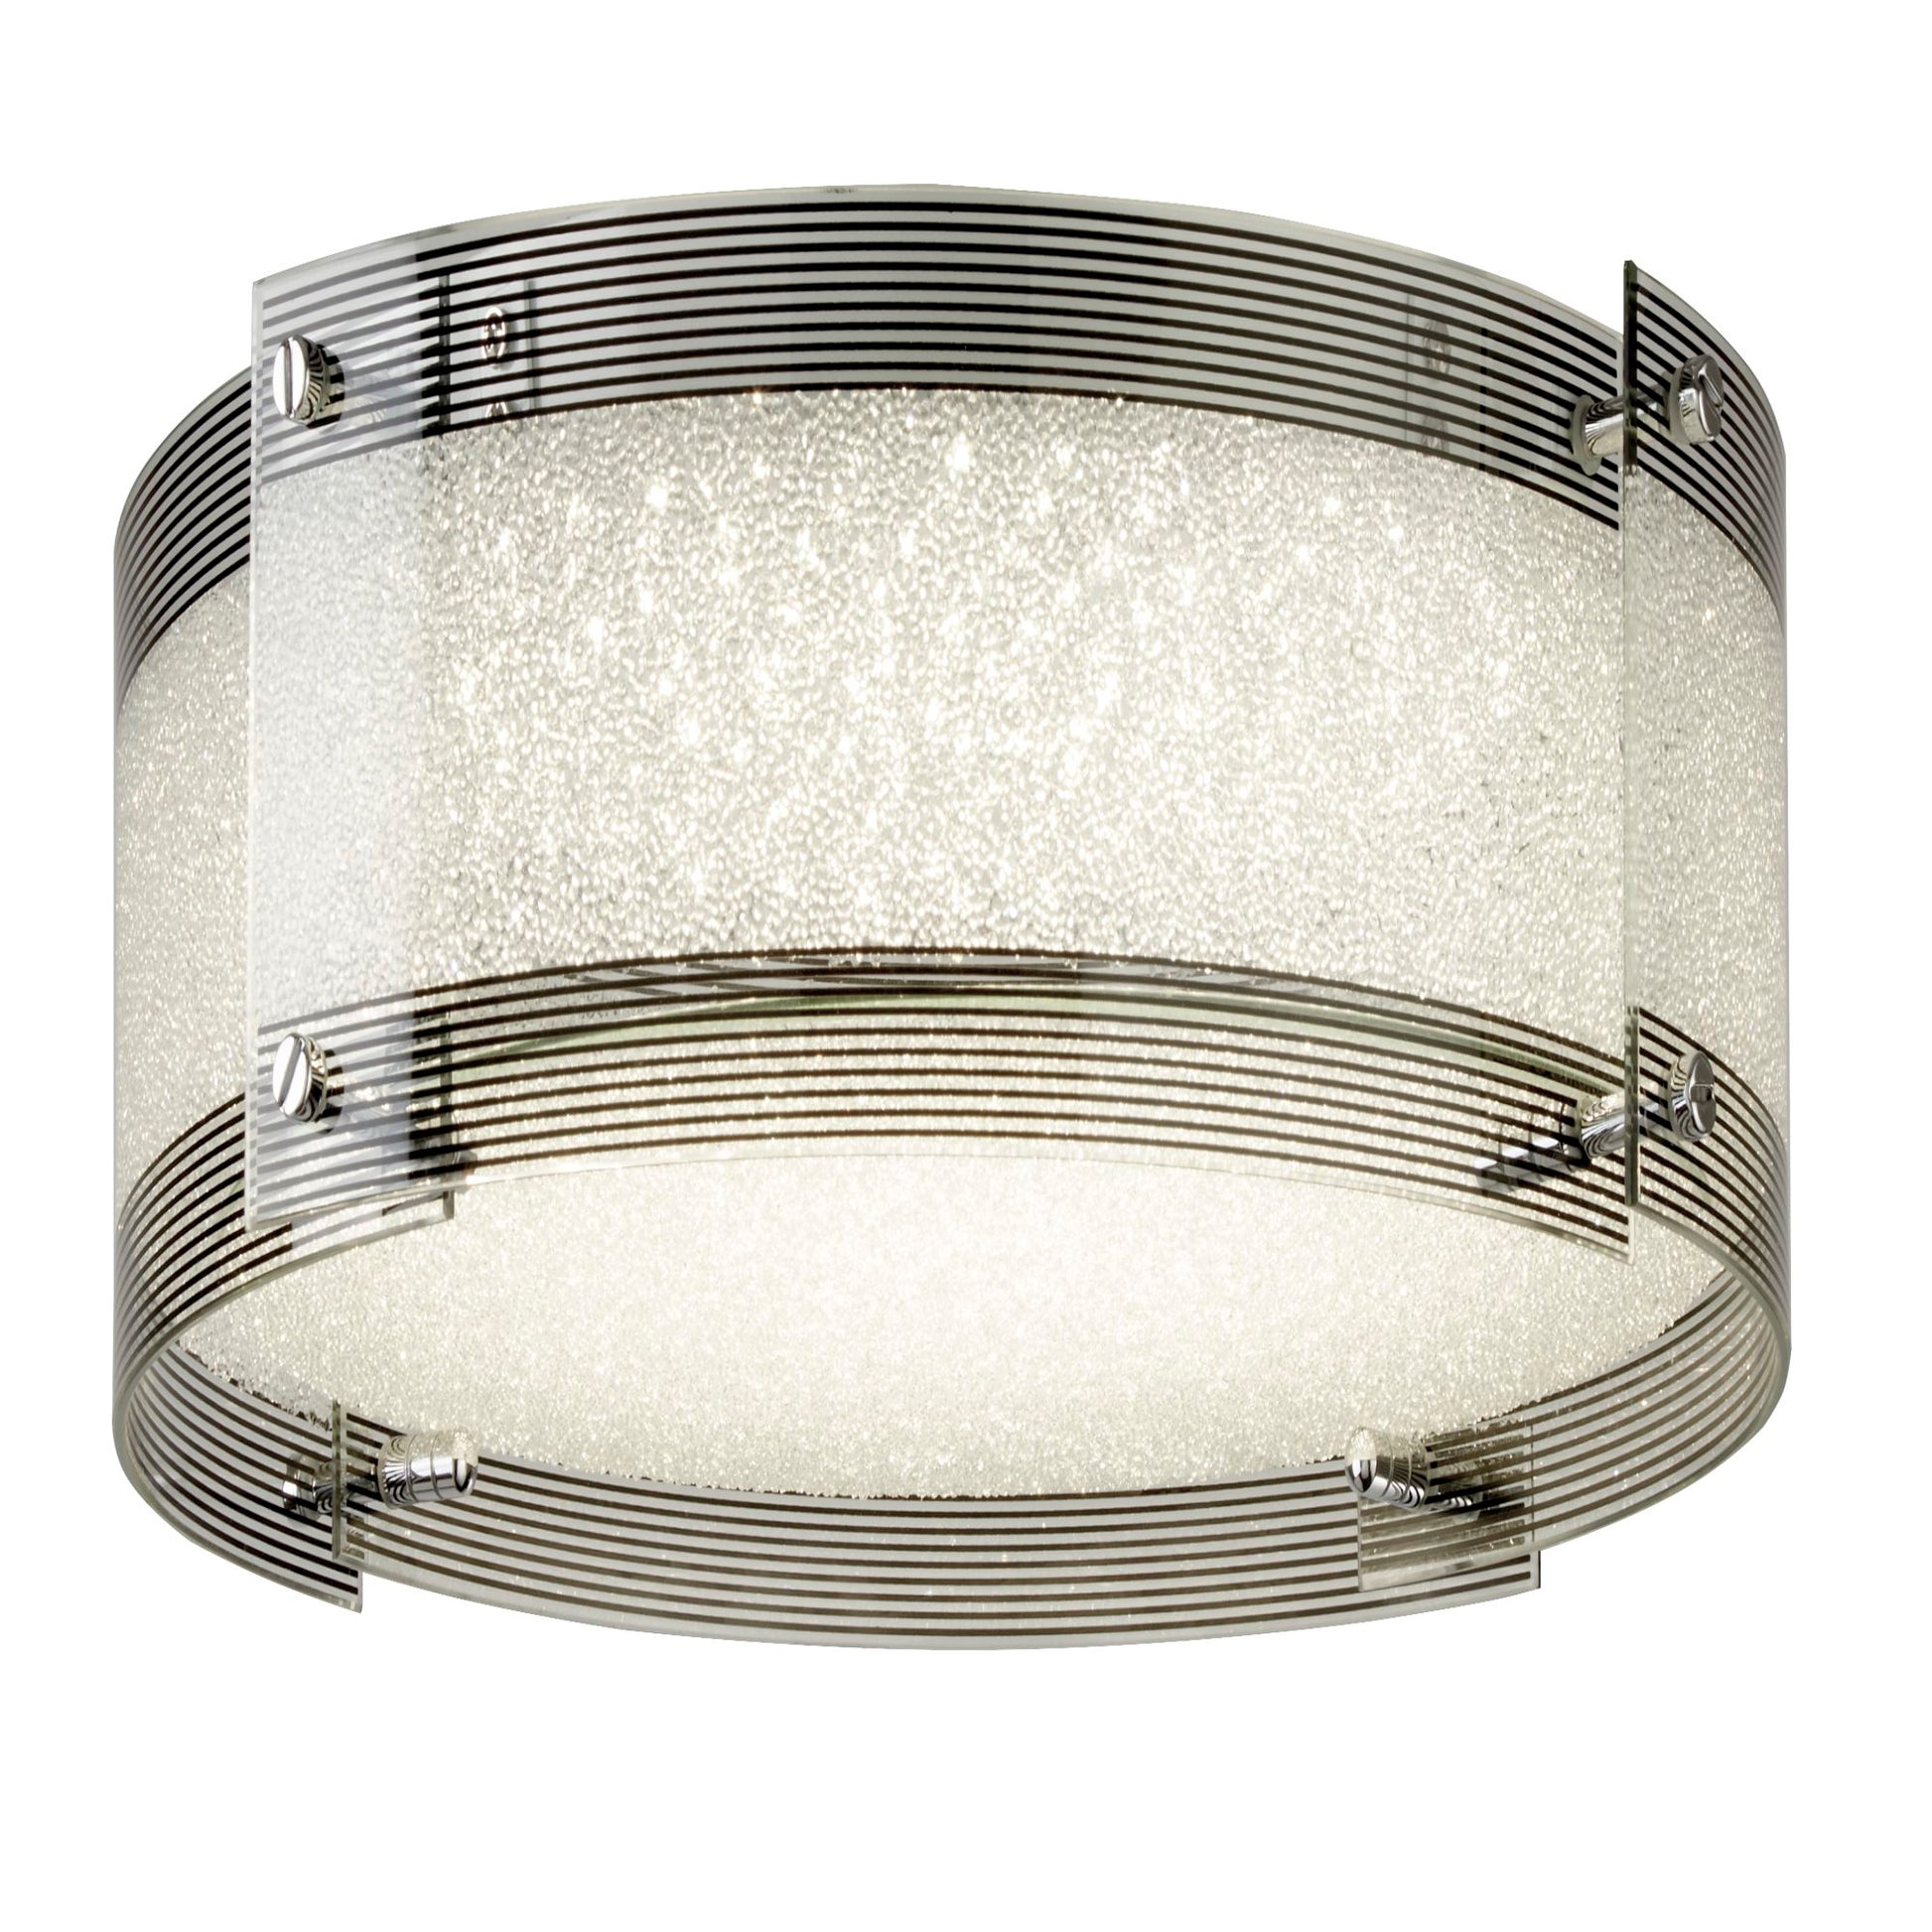 Searchlight Shelby LED Flush Light Dimmable Chrome/Crystal Glass